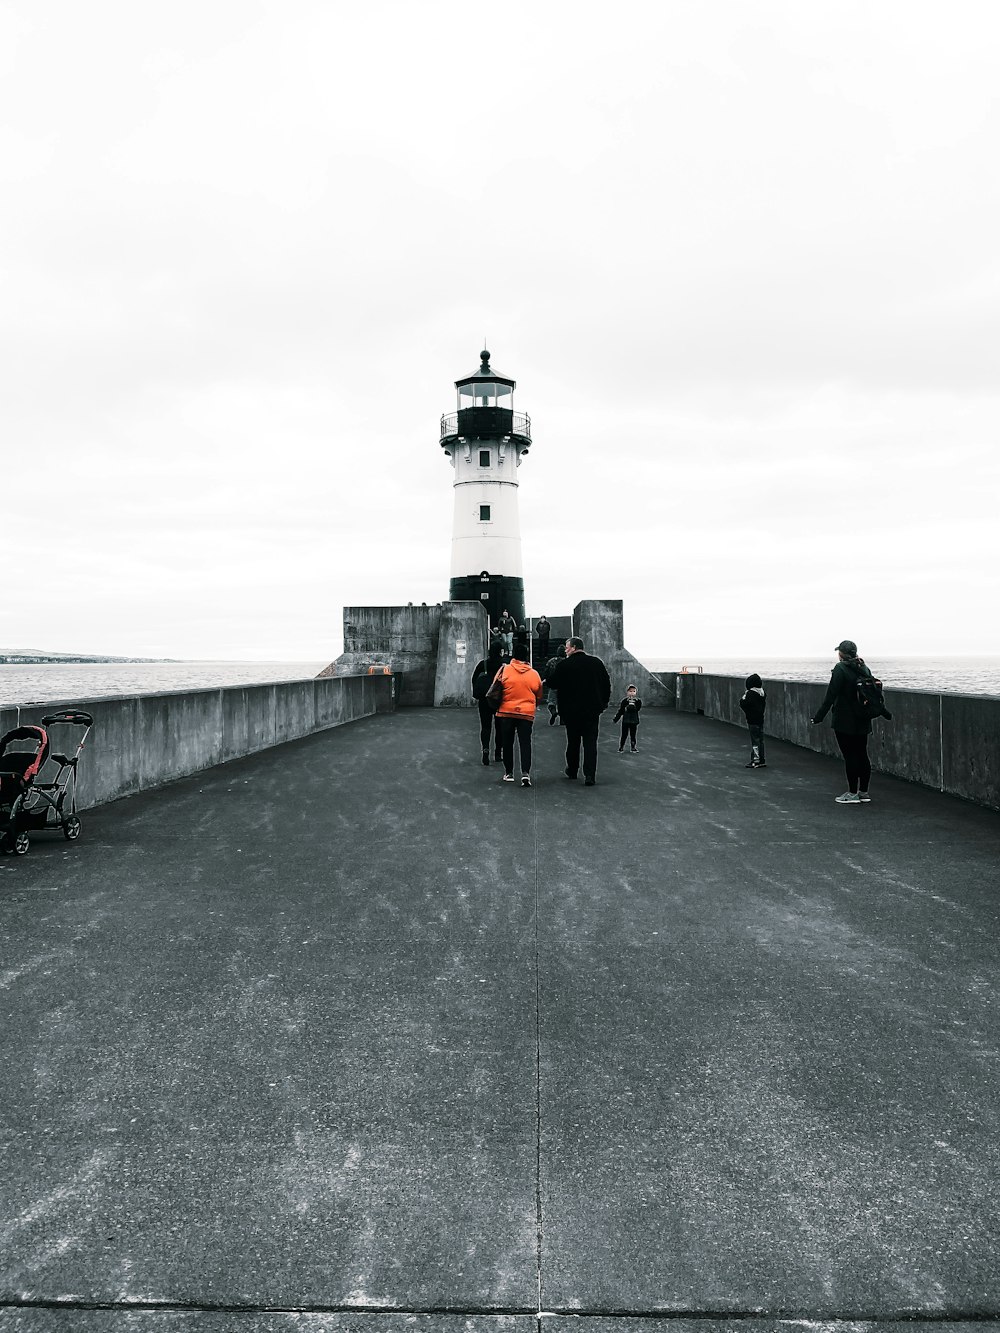 a group of people walking on a concrete walkway by a lighthouse